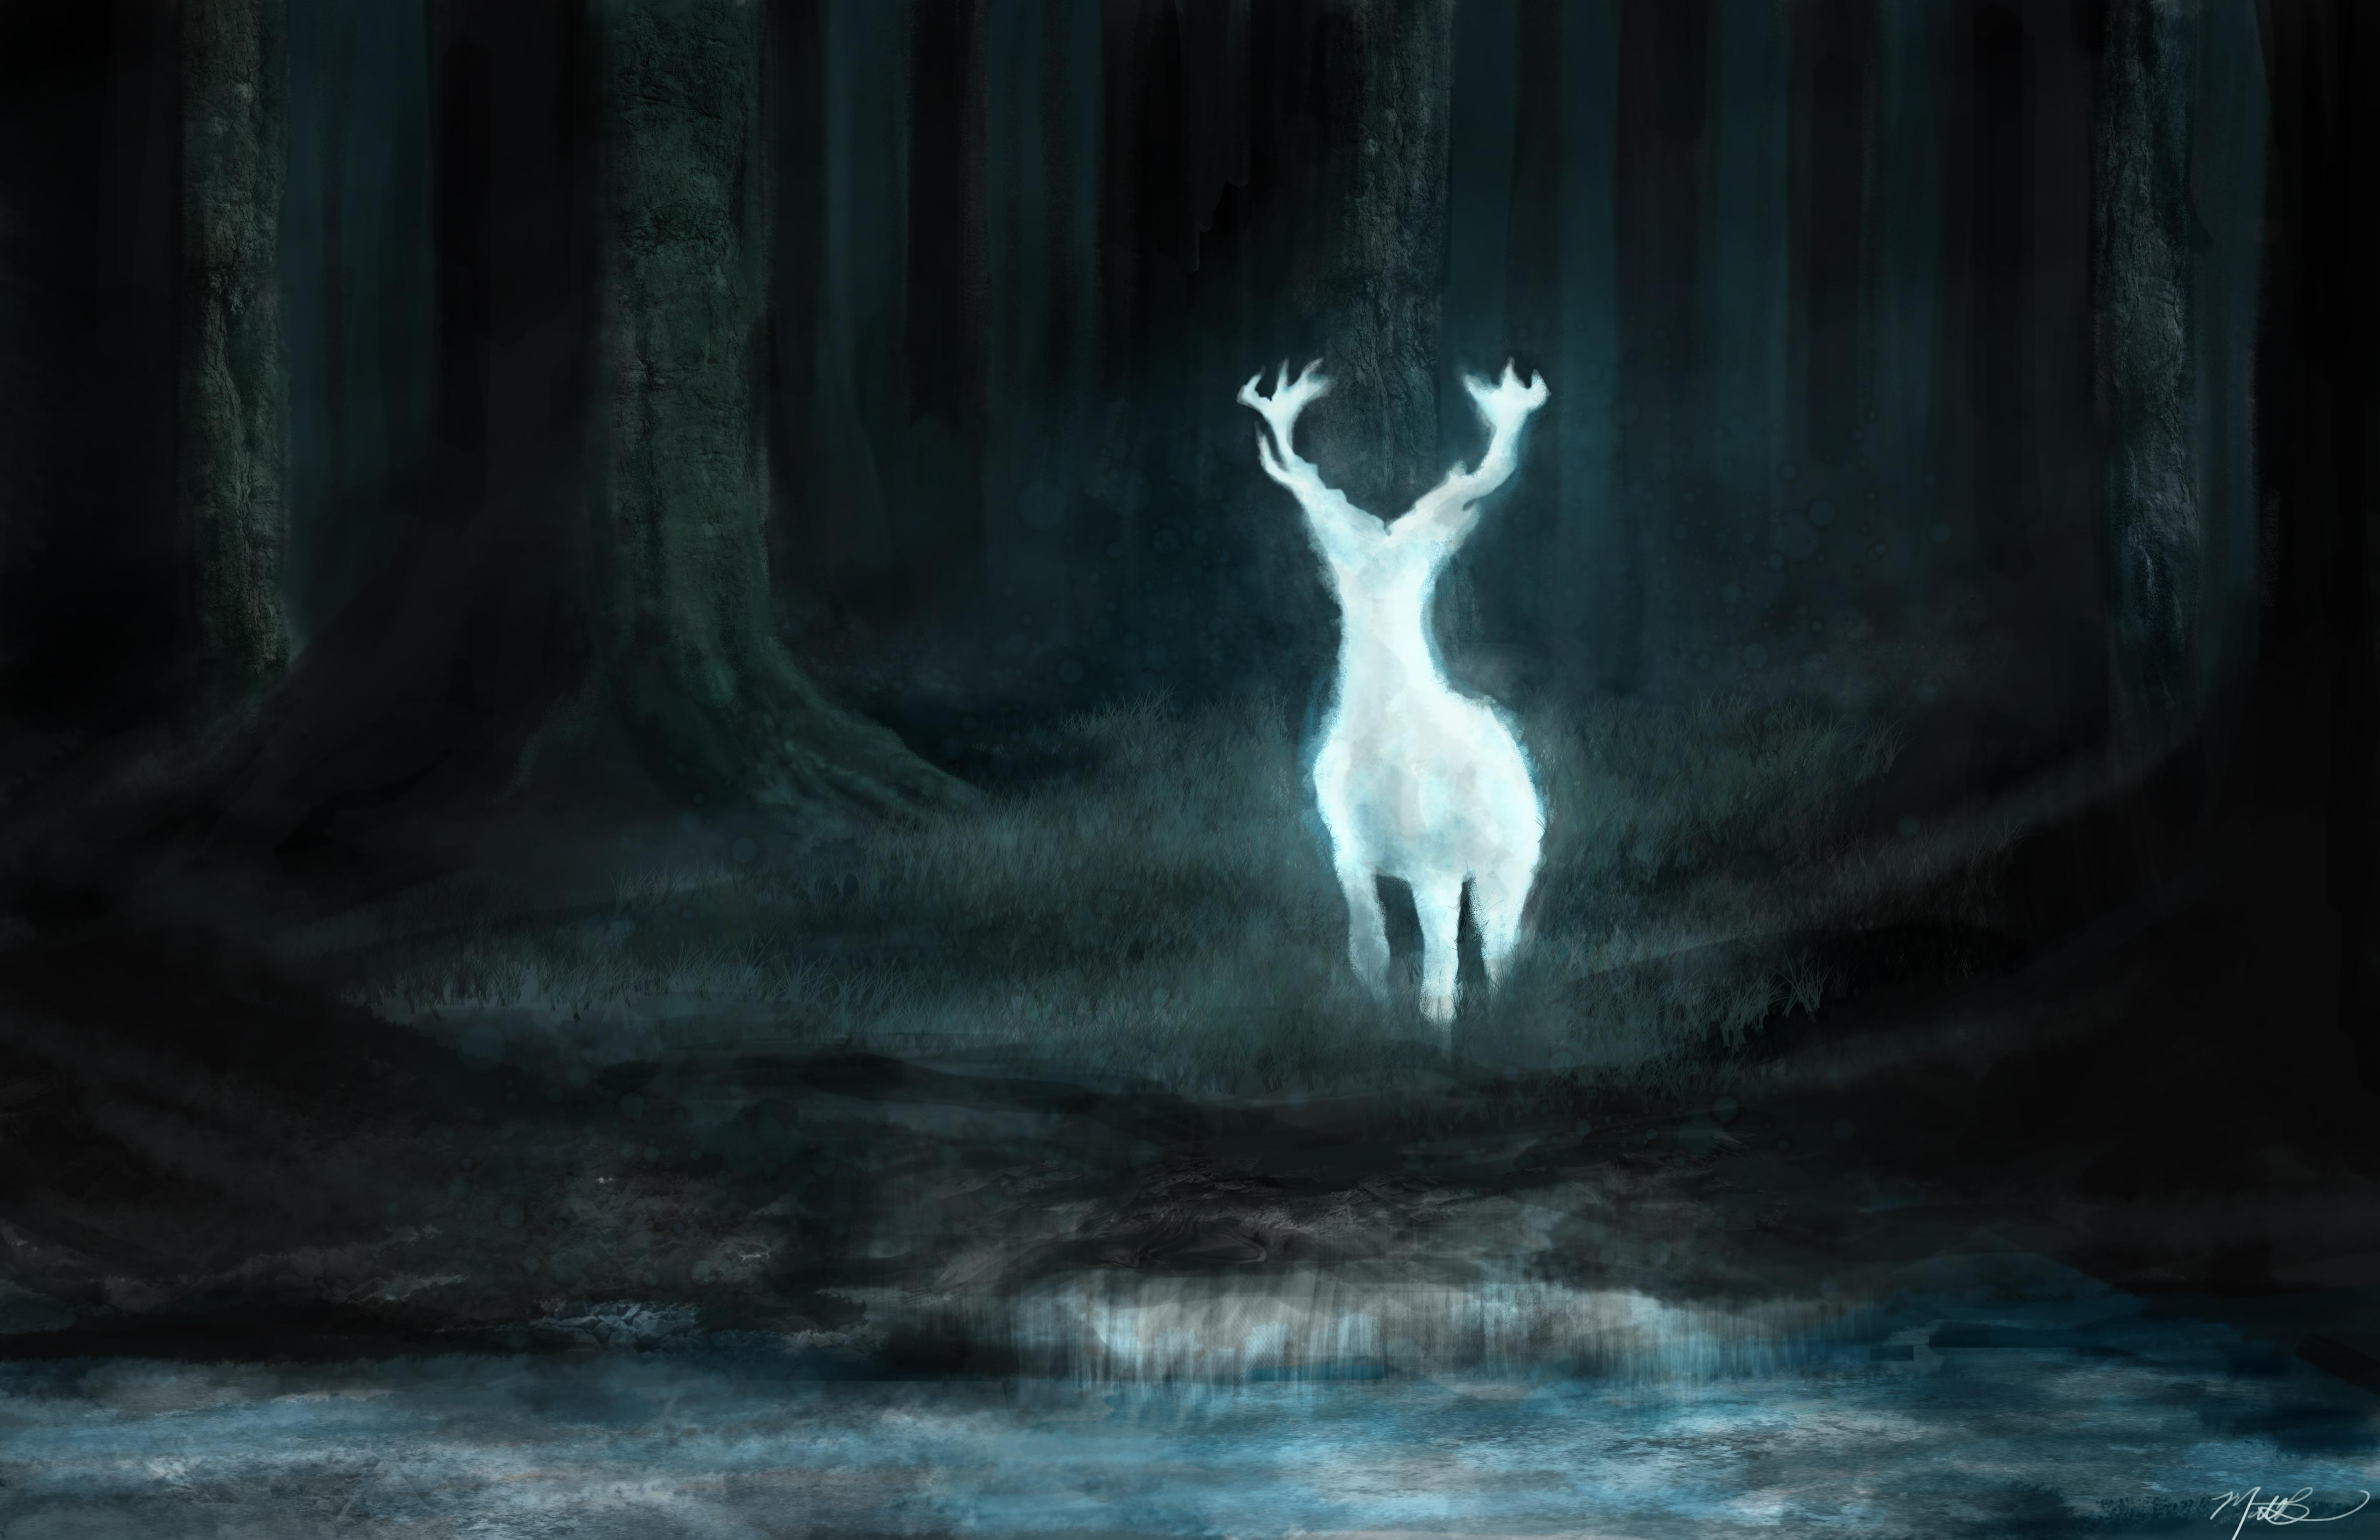 Expecto Patronum! 'Harry Potter' fans can now discover their own Patronus